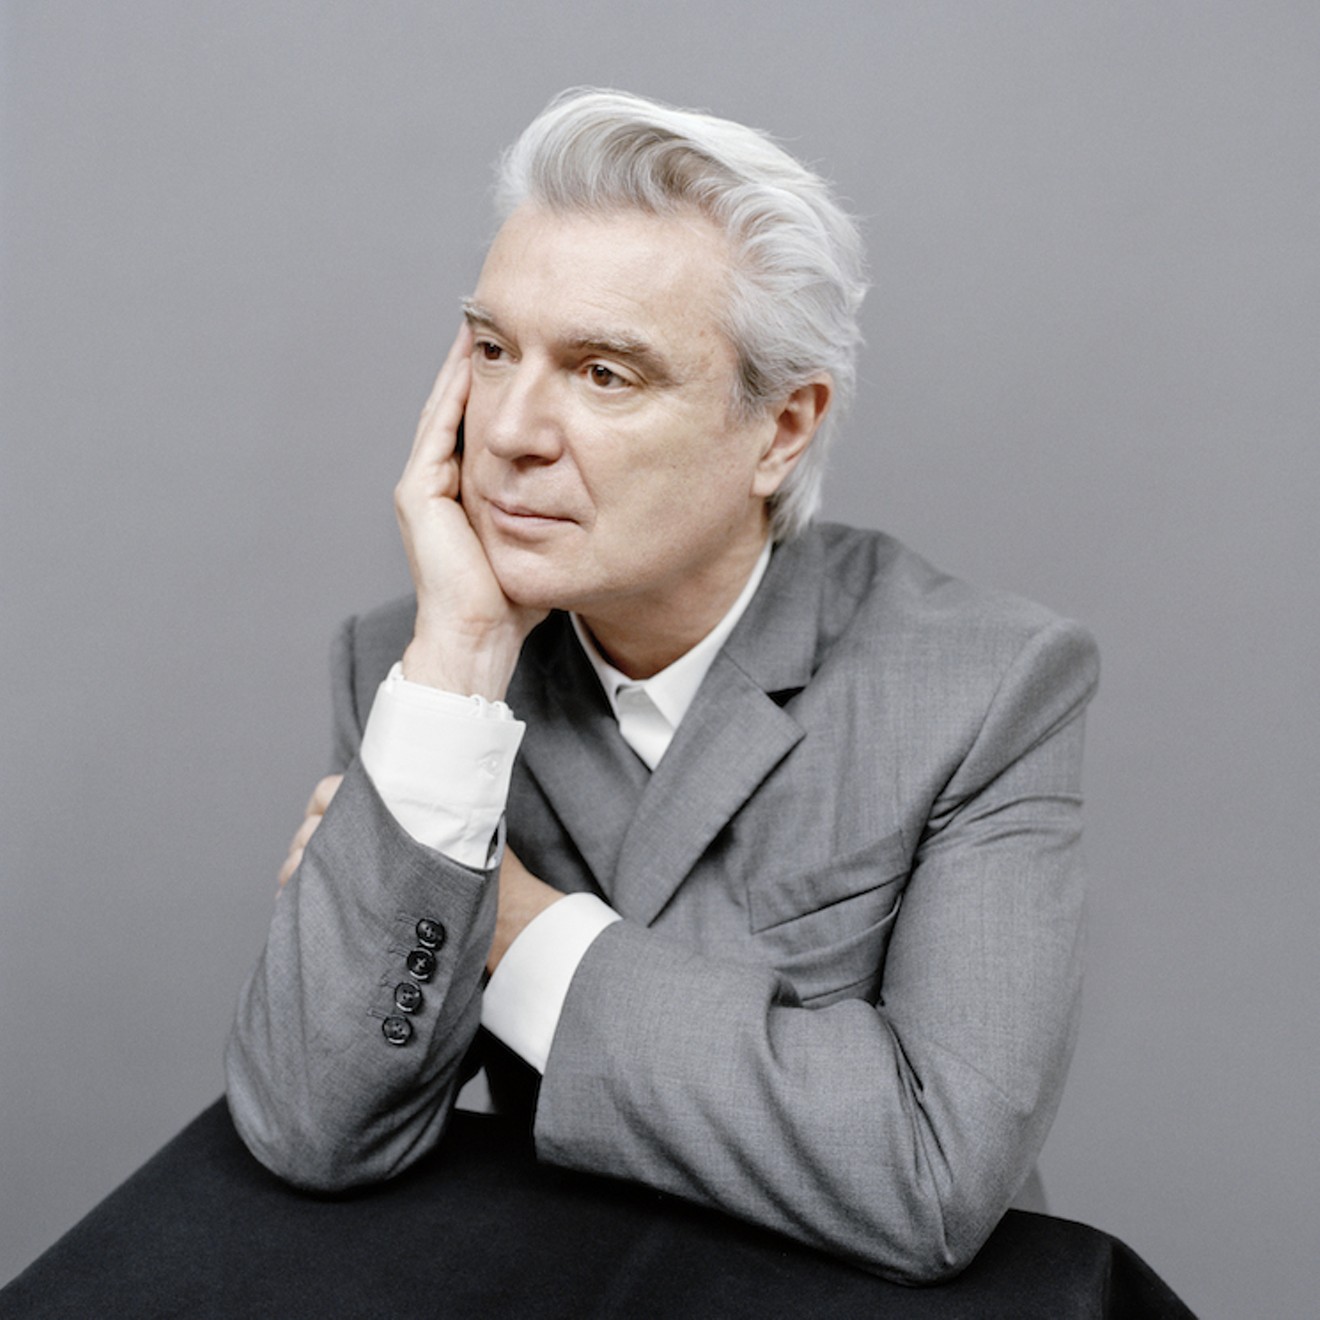 David Byrne will play the Winspear Opera House on April 24.